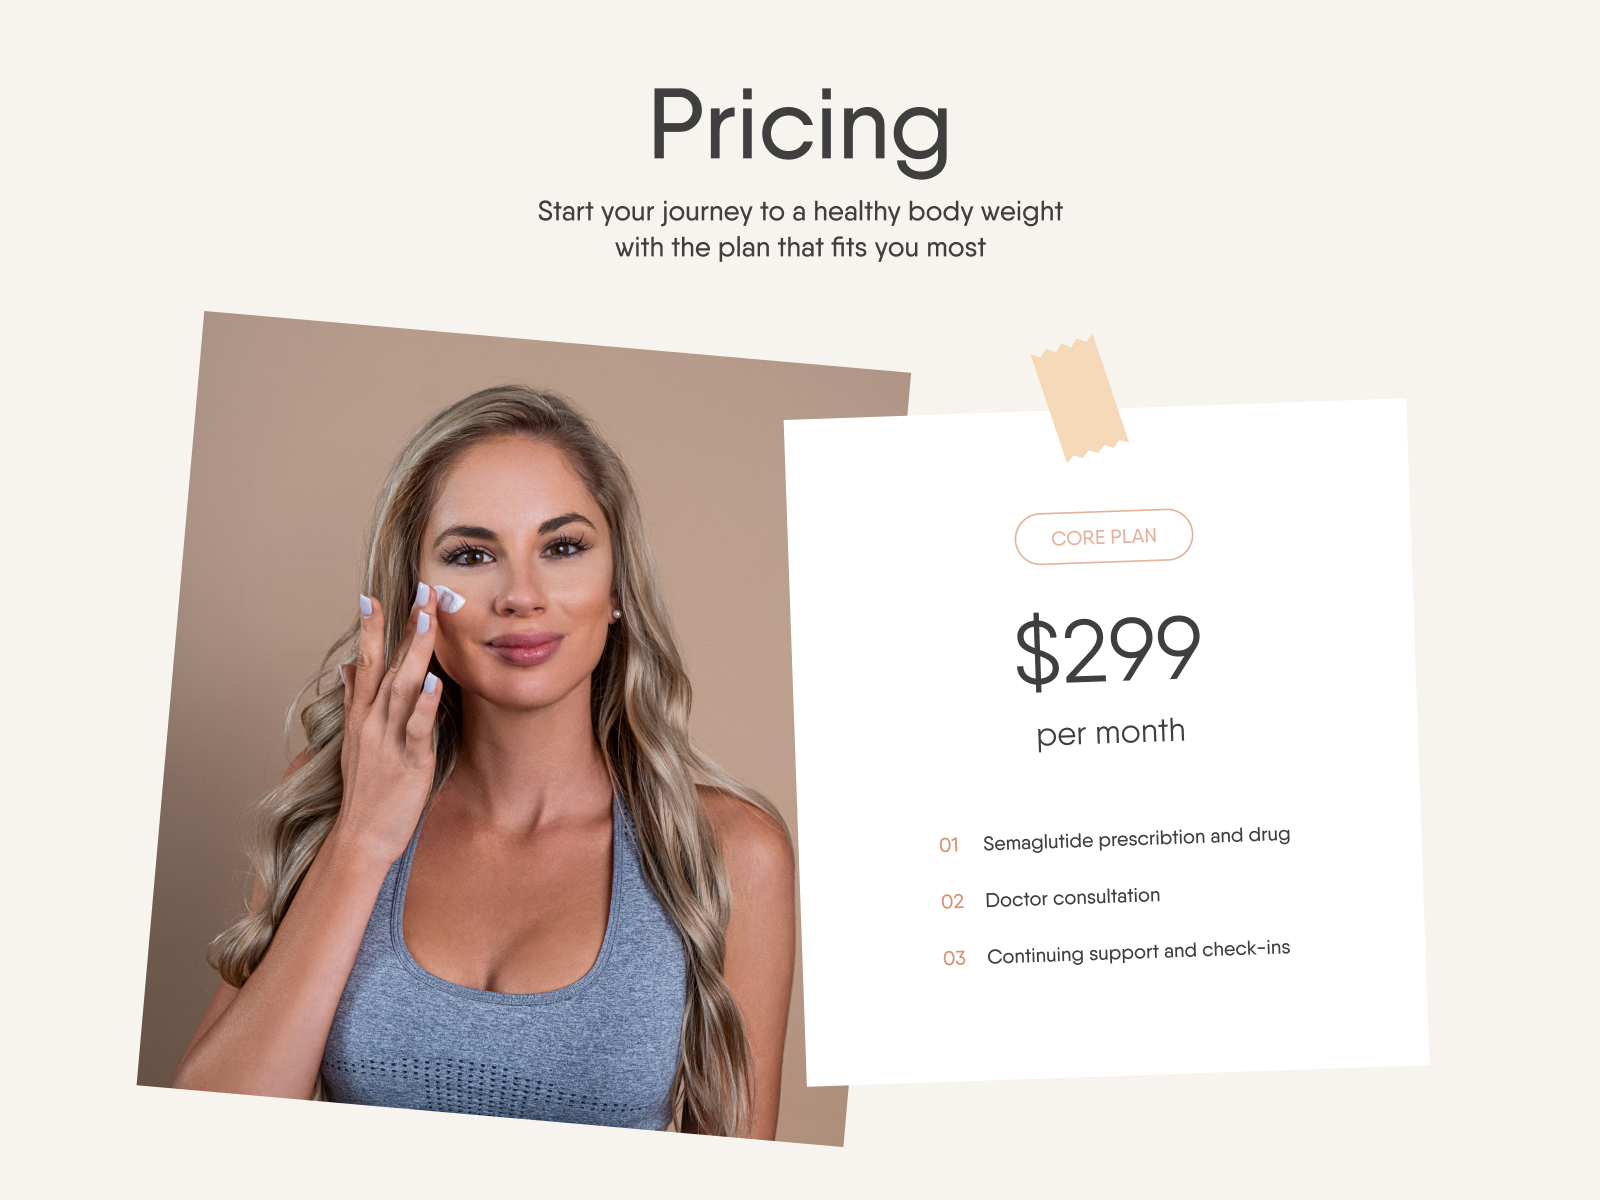 Pricing with two options — Core plan and Elite plan